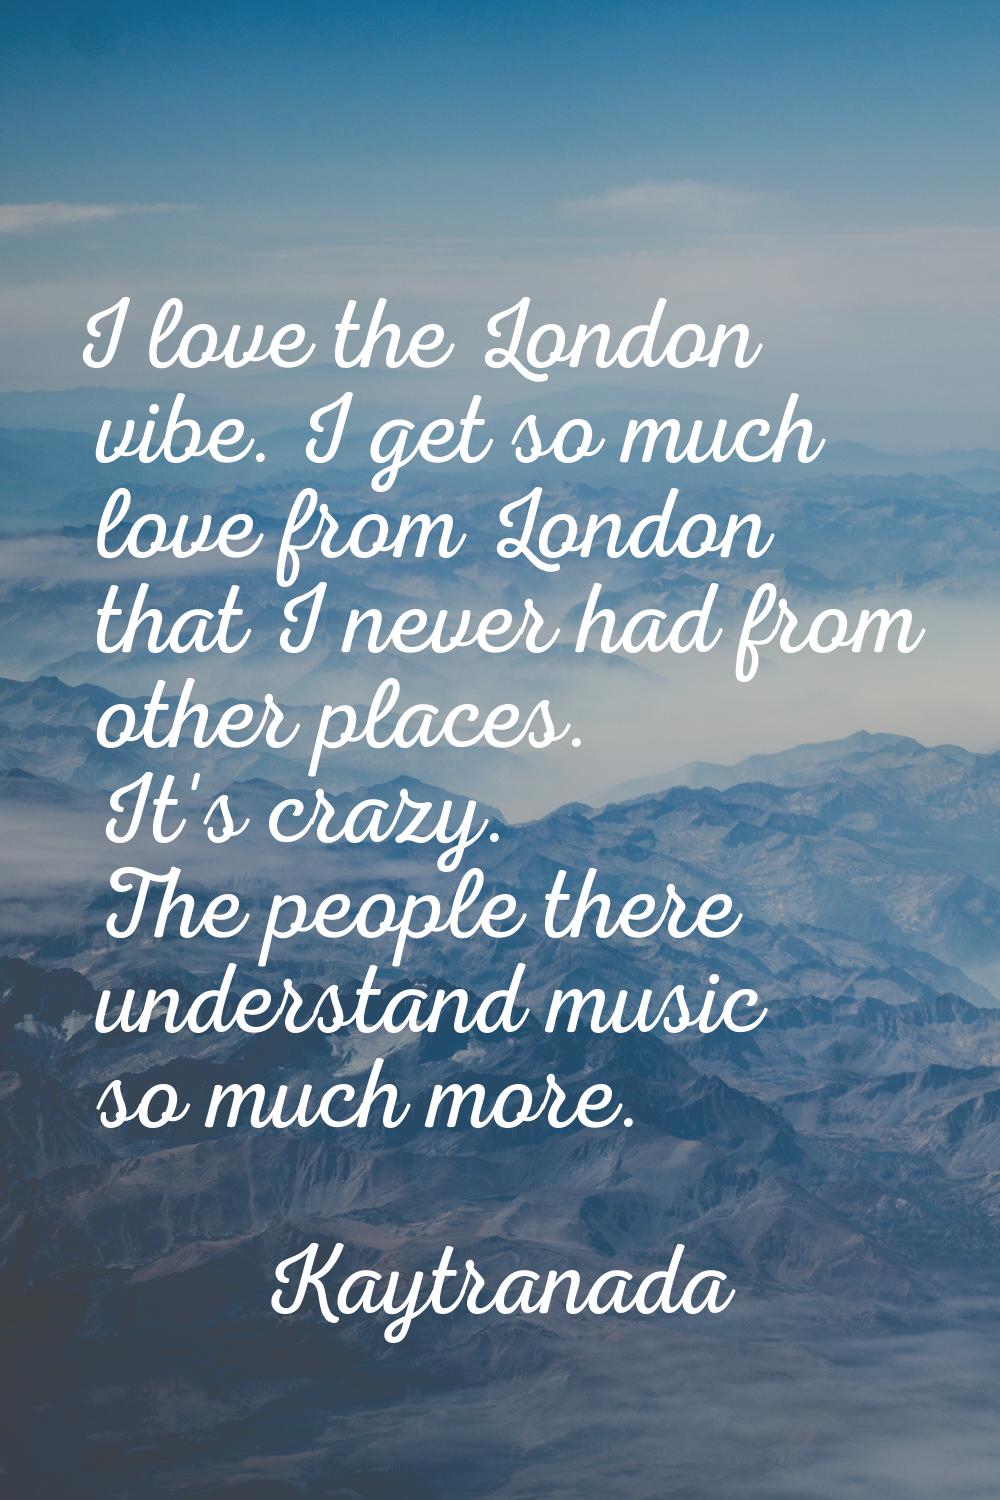 I love the London vibe. I get so much love from London that I never had from other places. It's cra